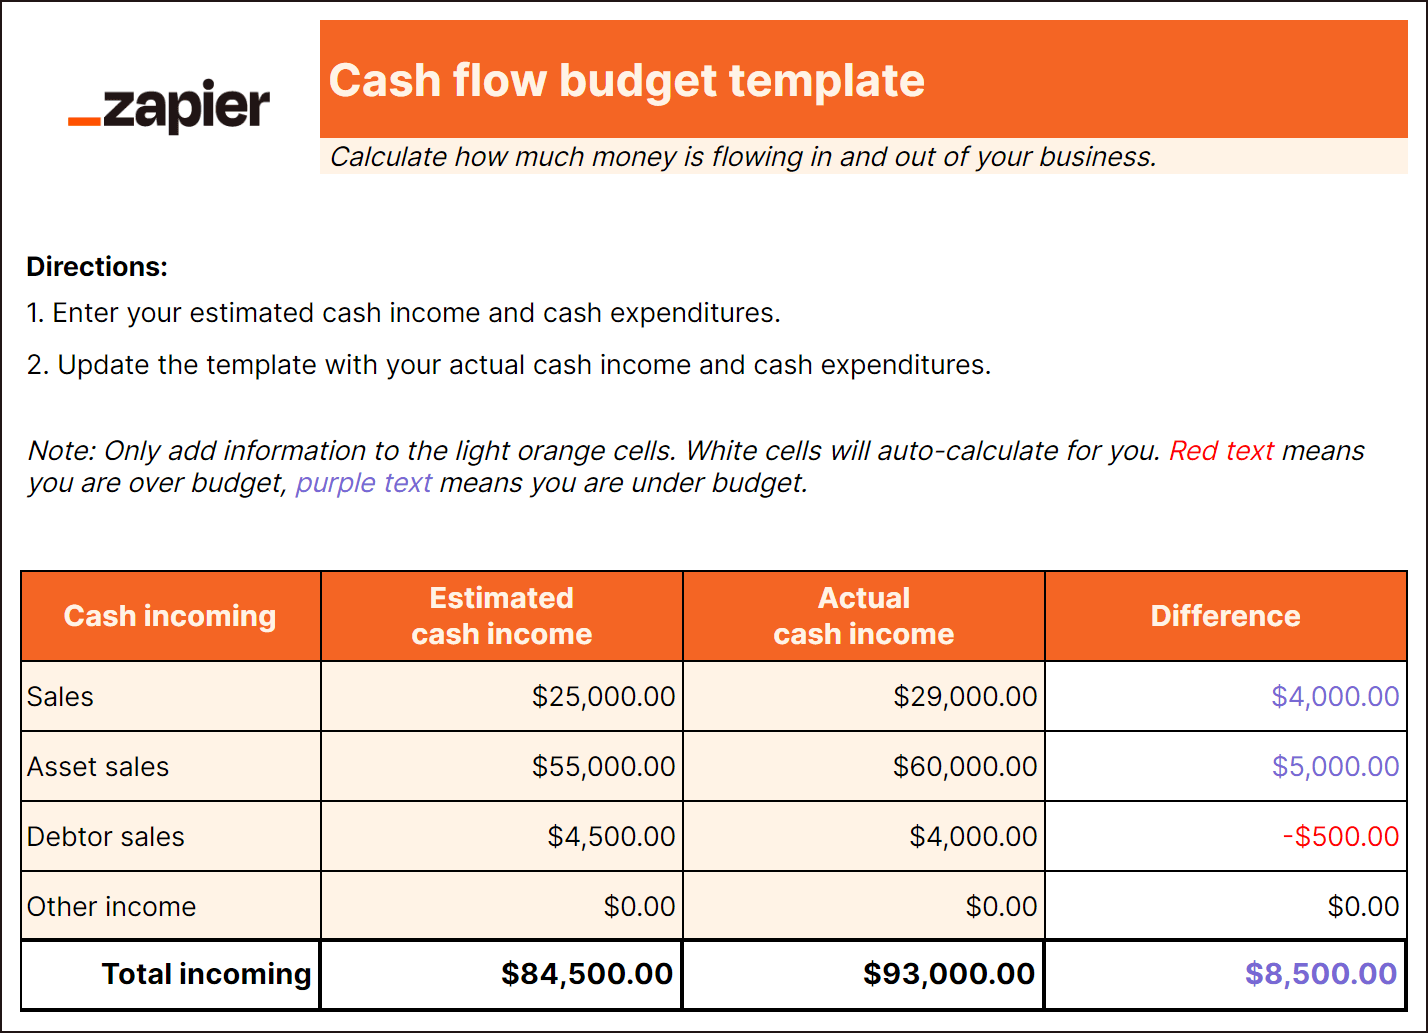 7 free small business budget templates